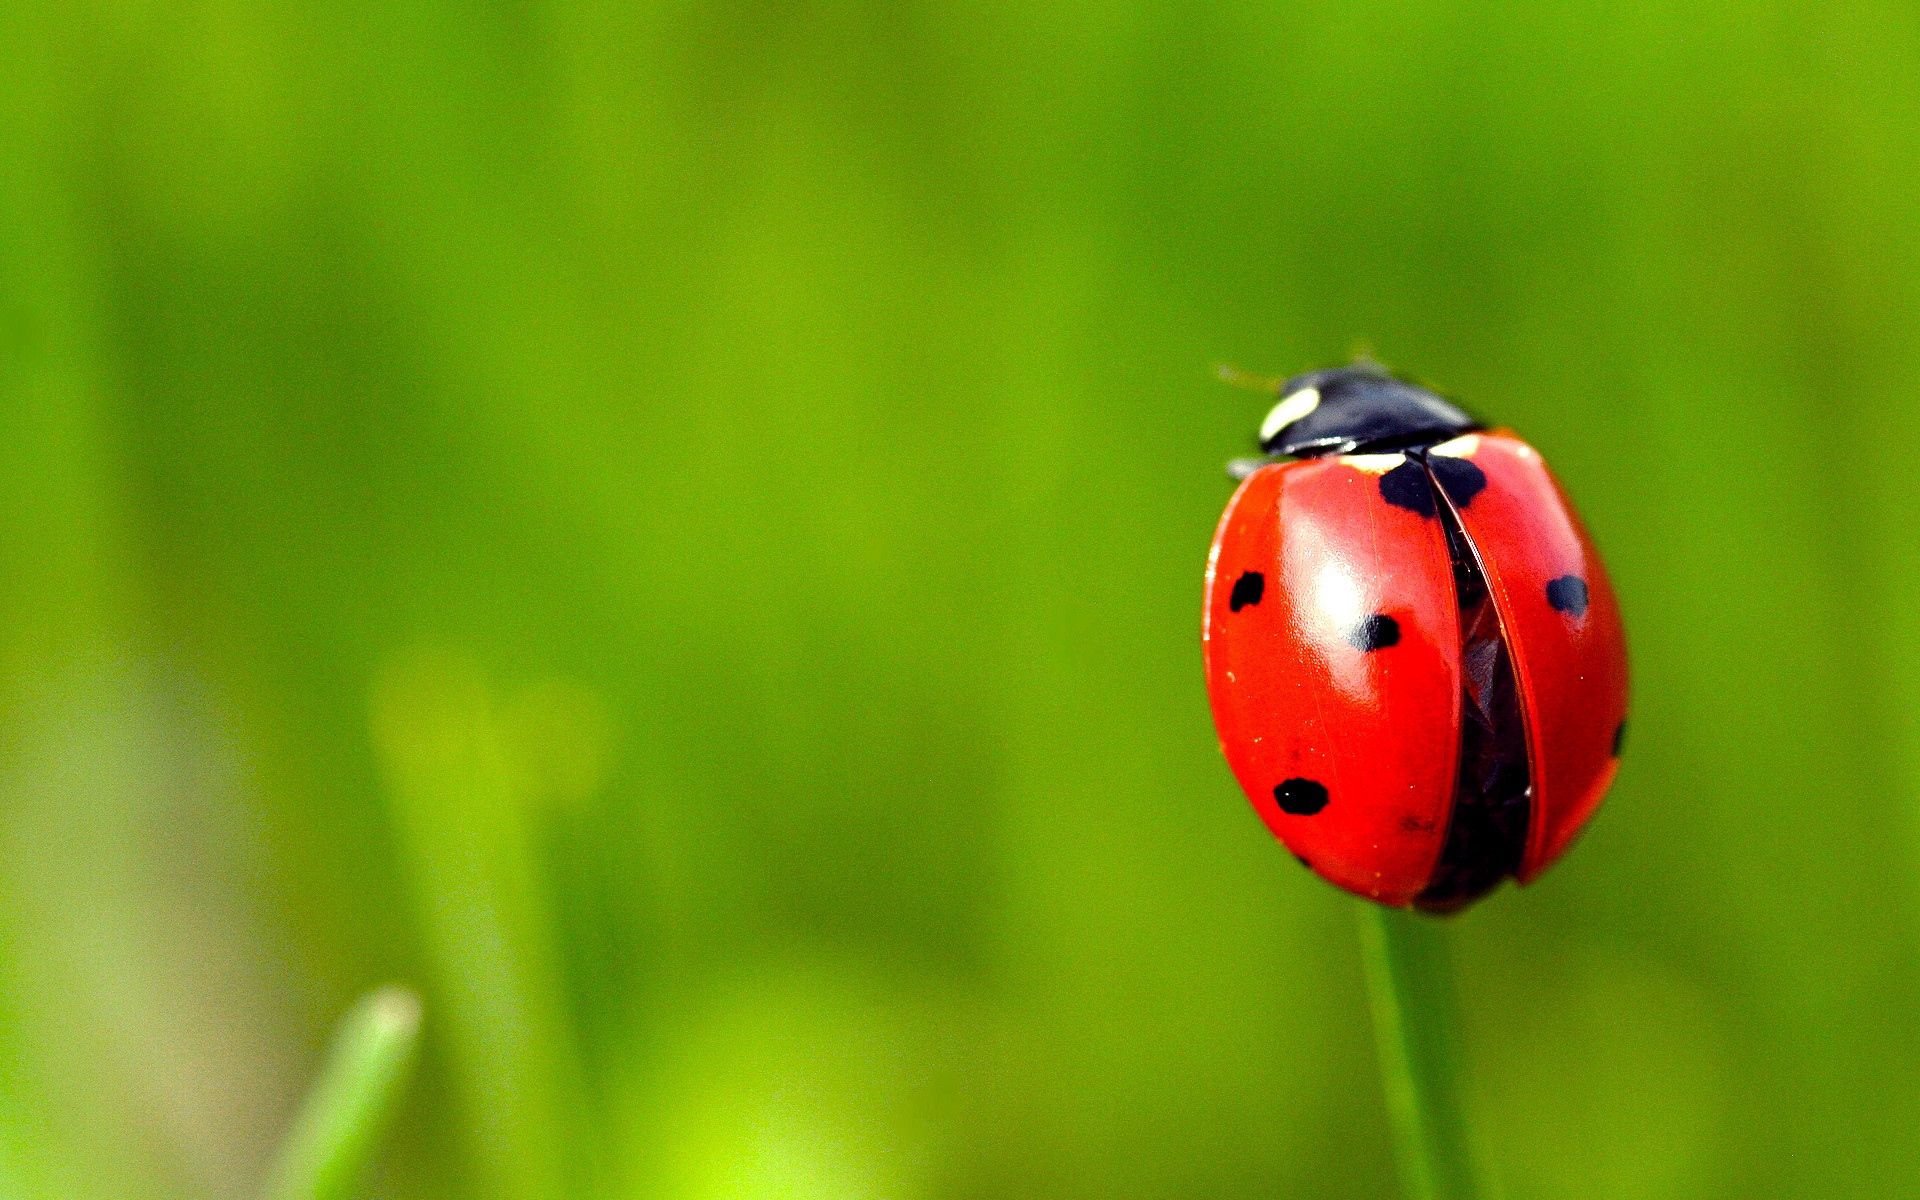 smooth, grass, red, macro, blur, stains, spots, ladybug, ladybird wallpaper for mobile